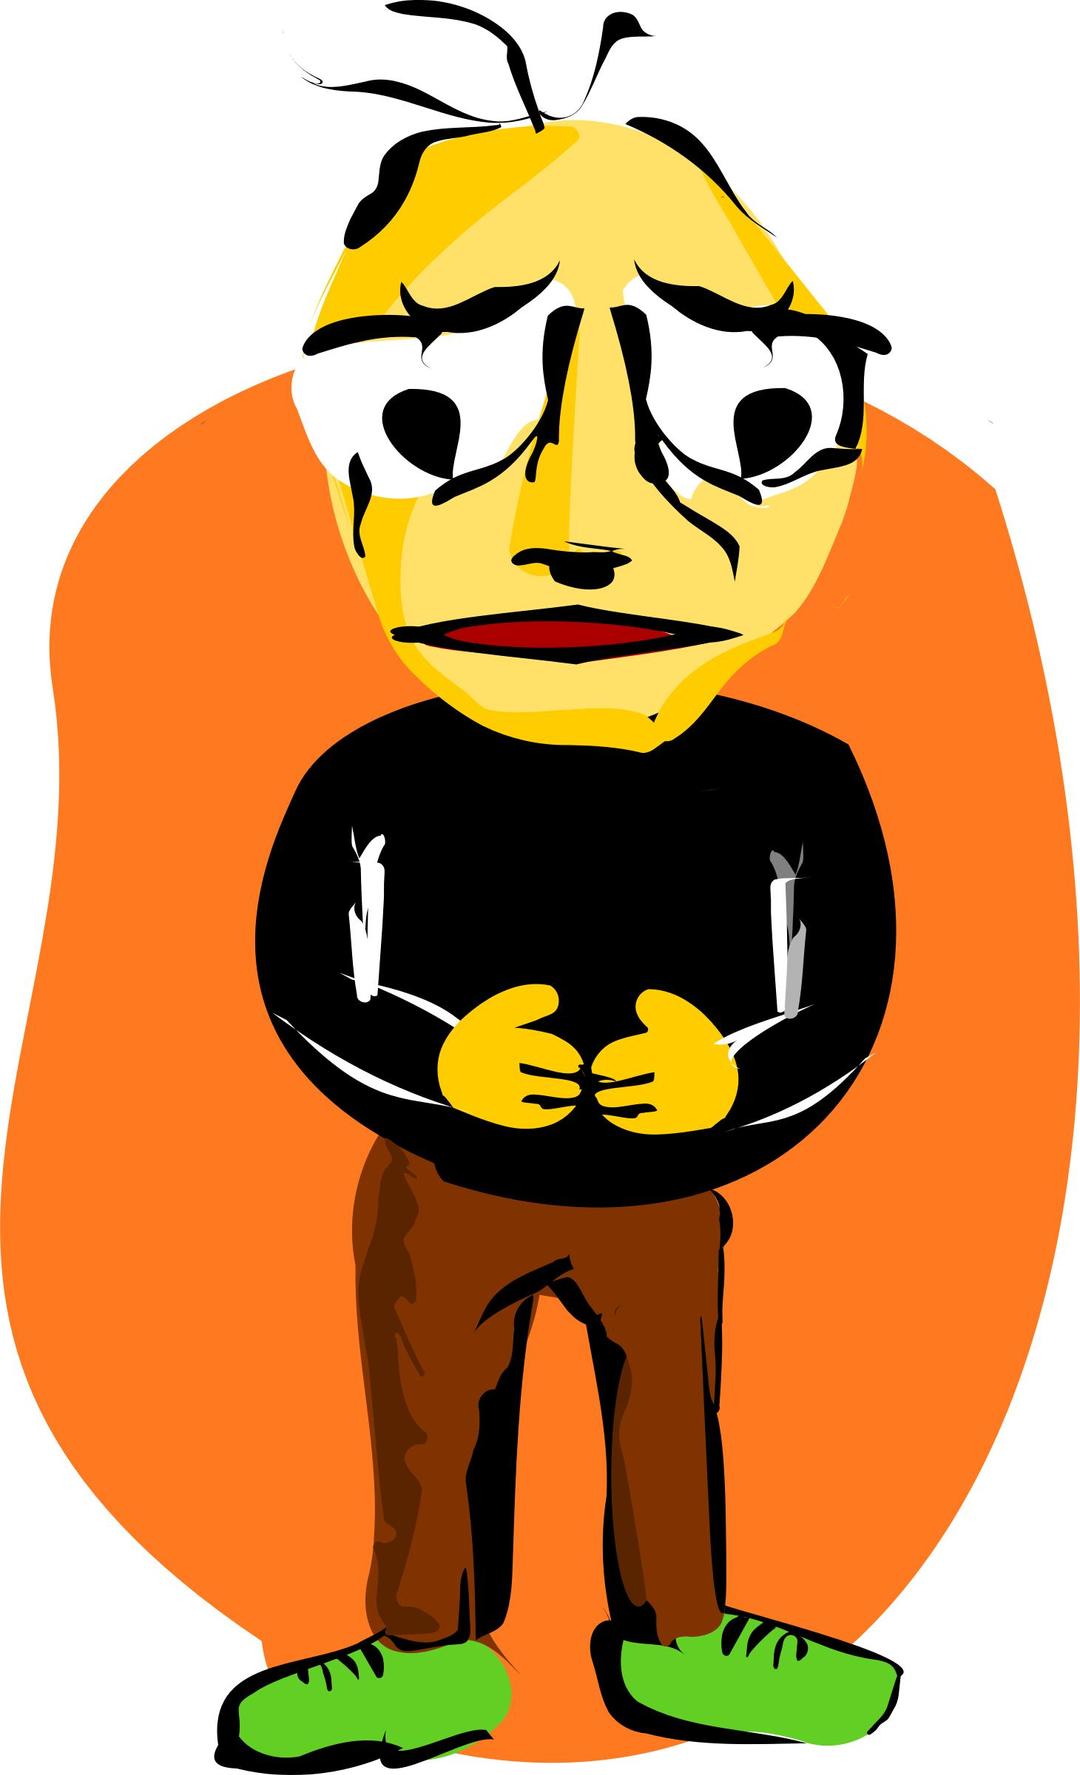 Sad man with open stance png transparent